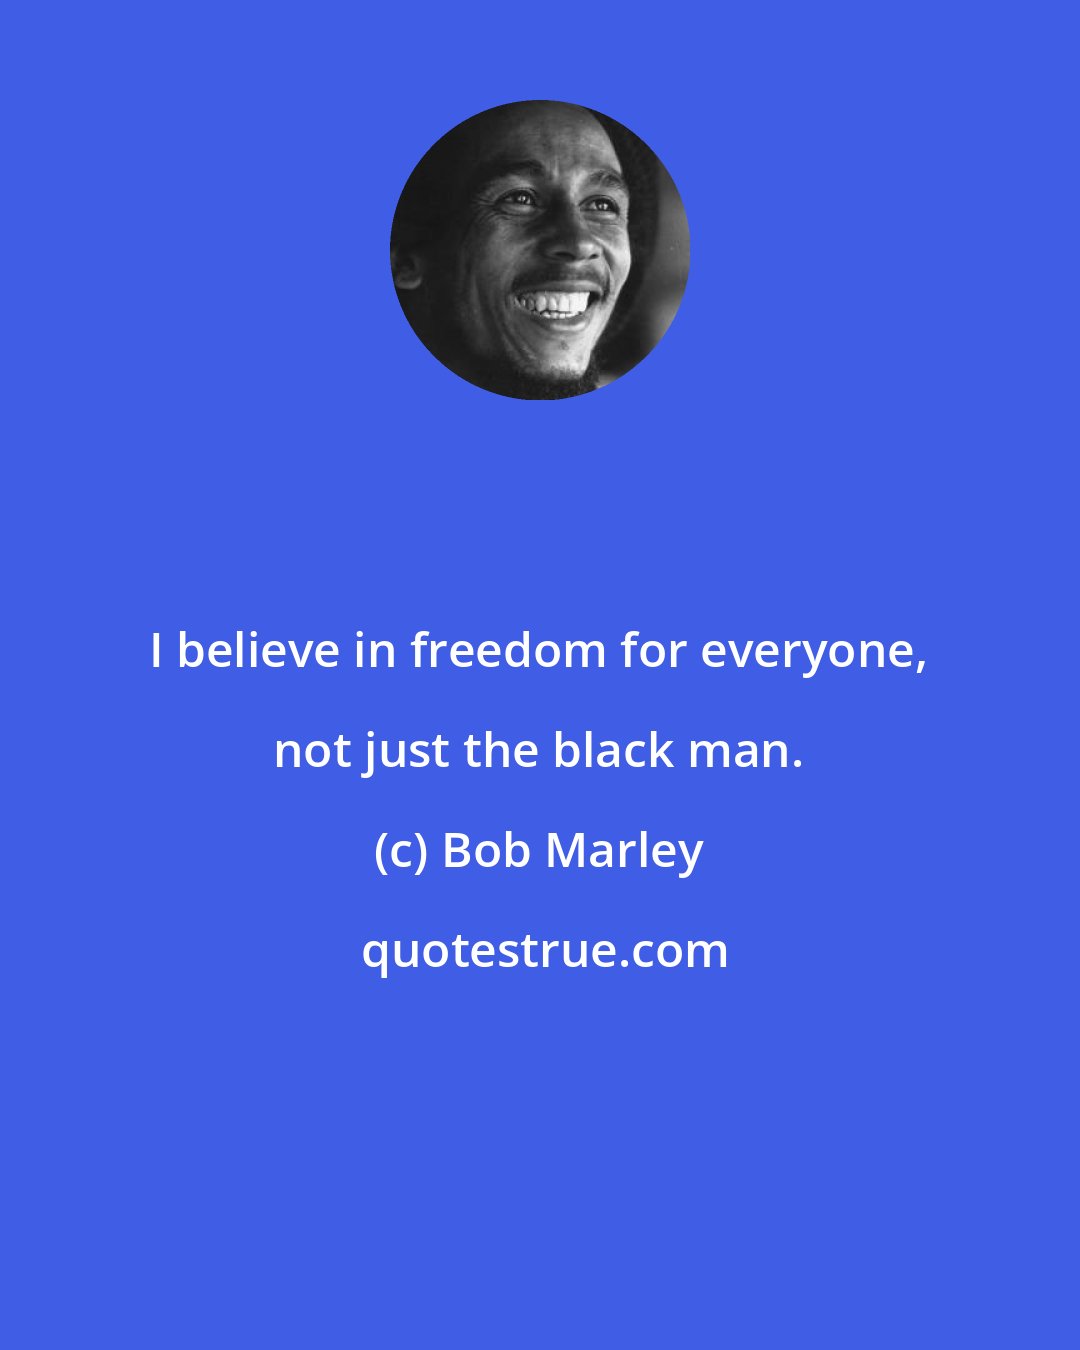 Bob Marley: I believe in freedom for everyone, not just the black man.